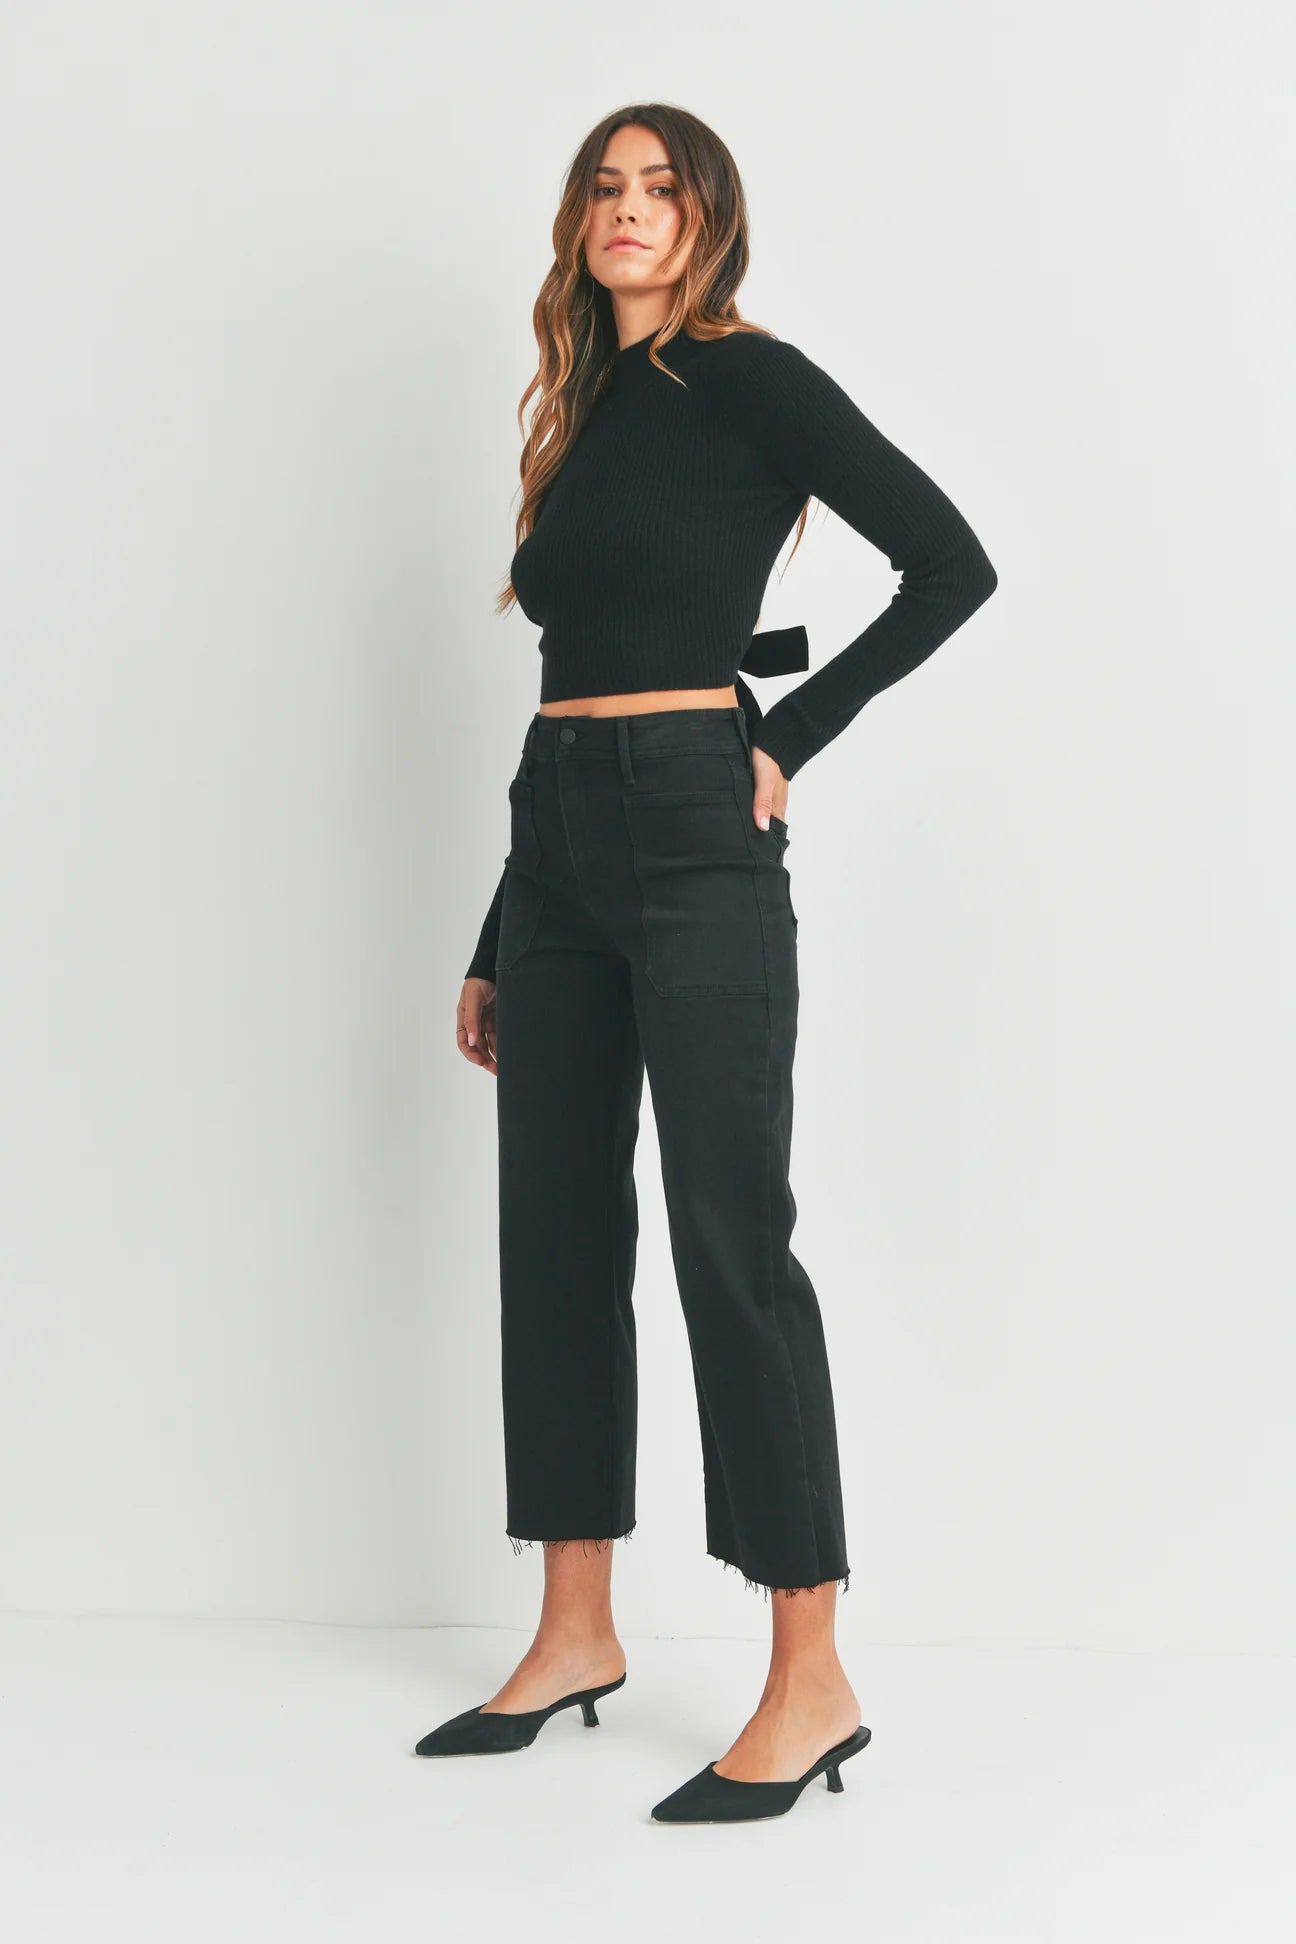 The Nautical Washed Black Jeans